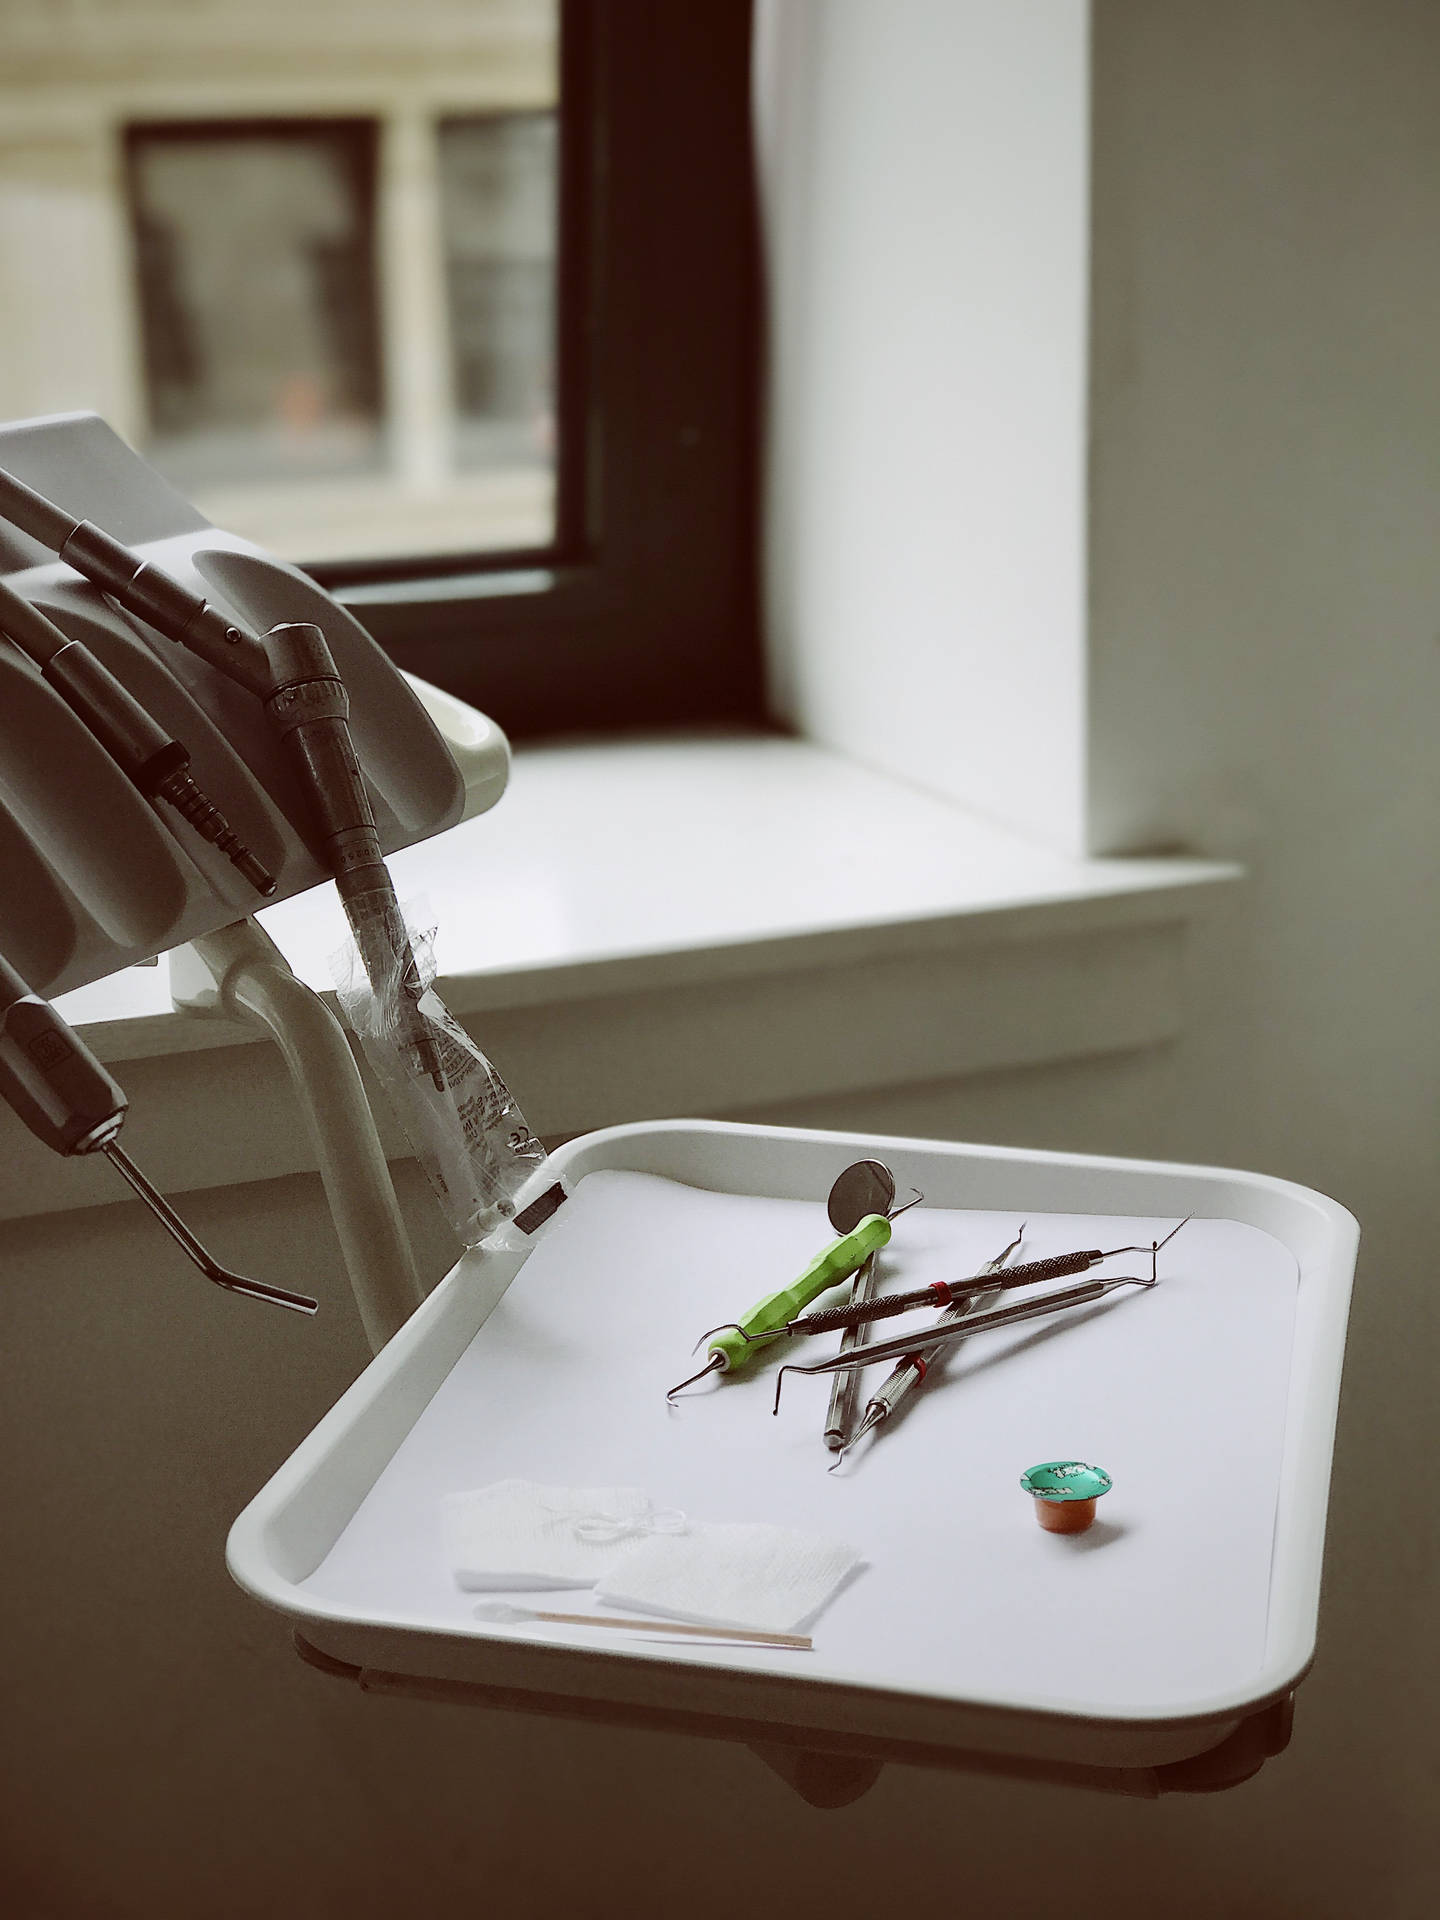 Dentistry Tools By A Window Wallpaper